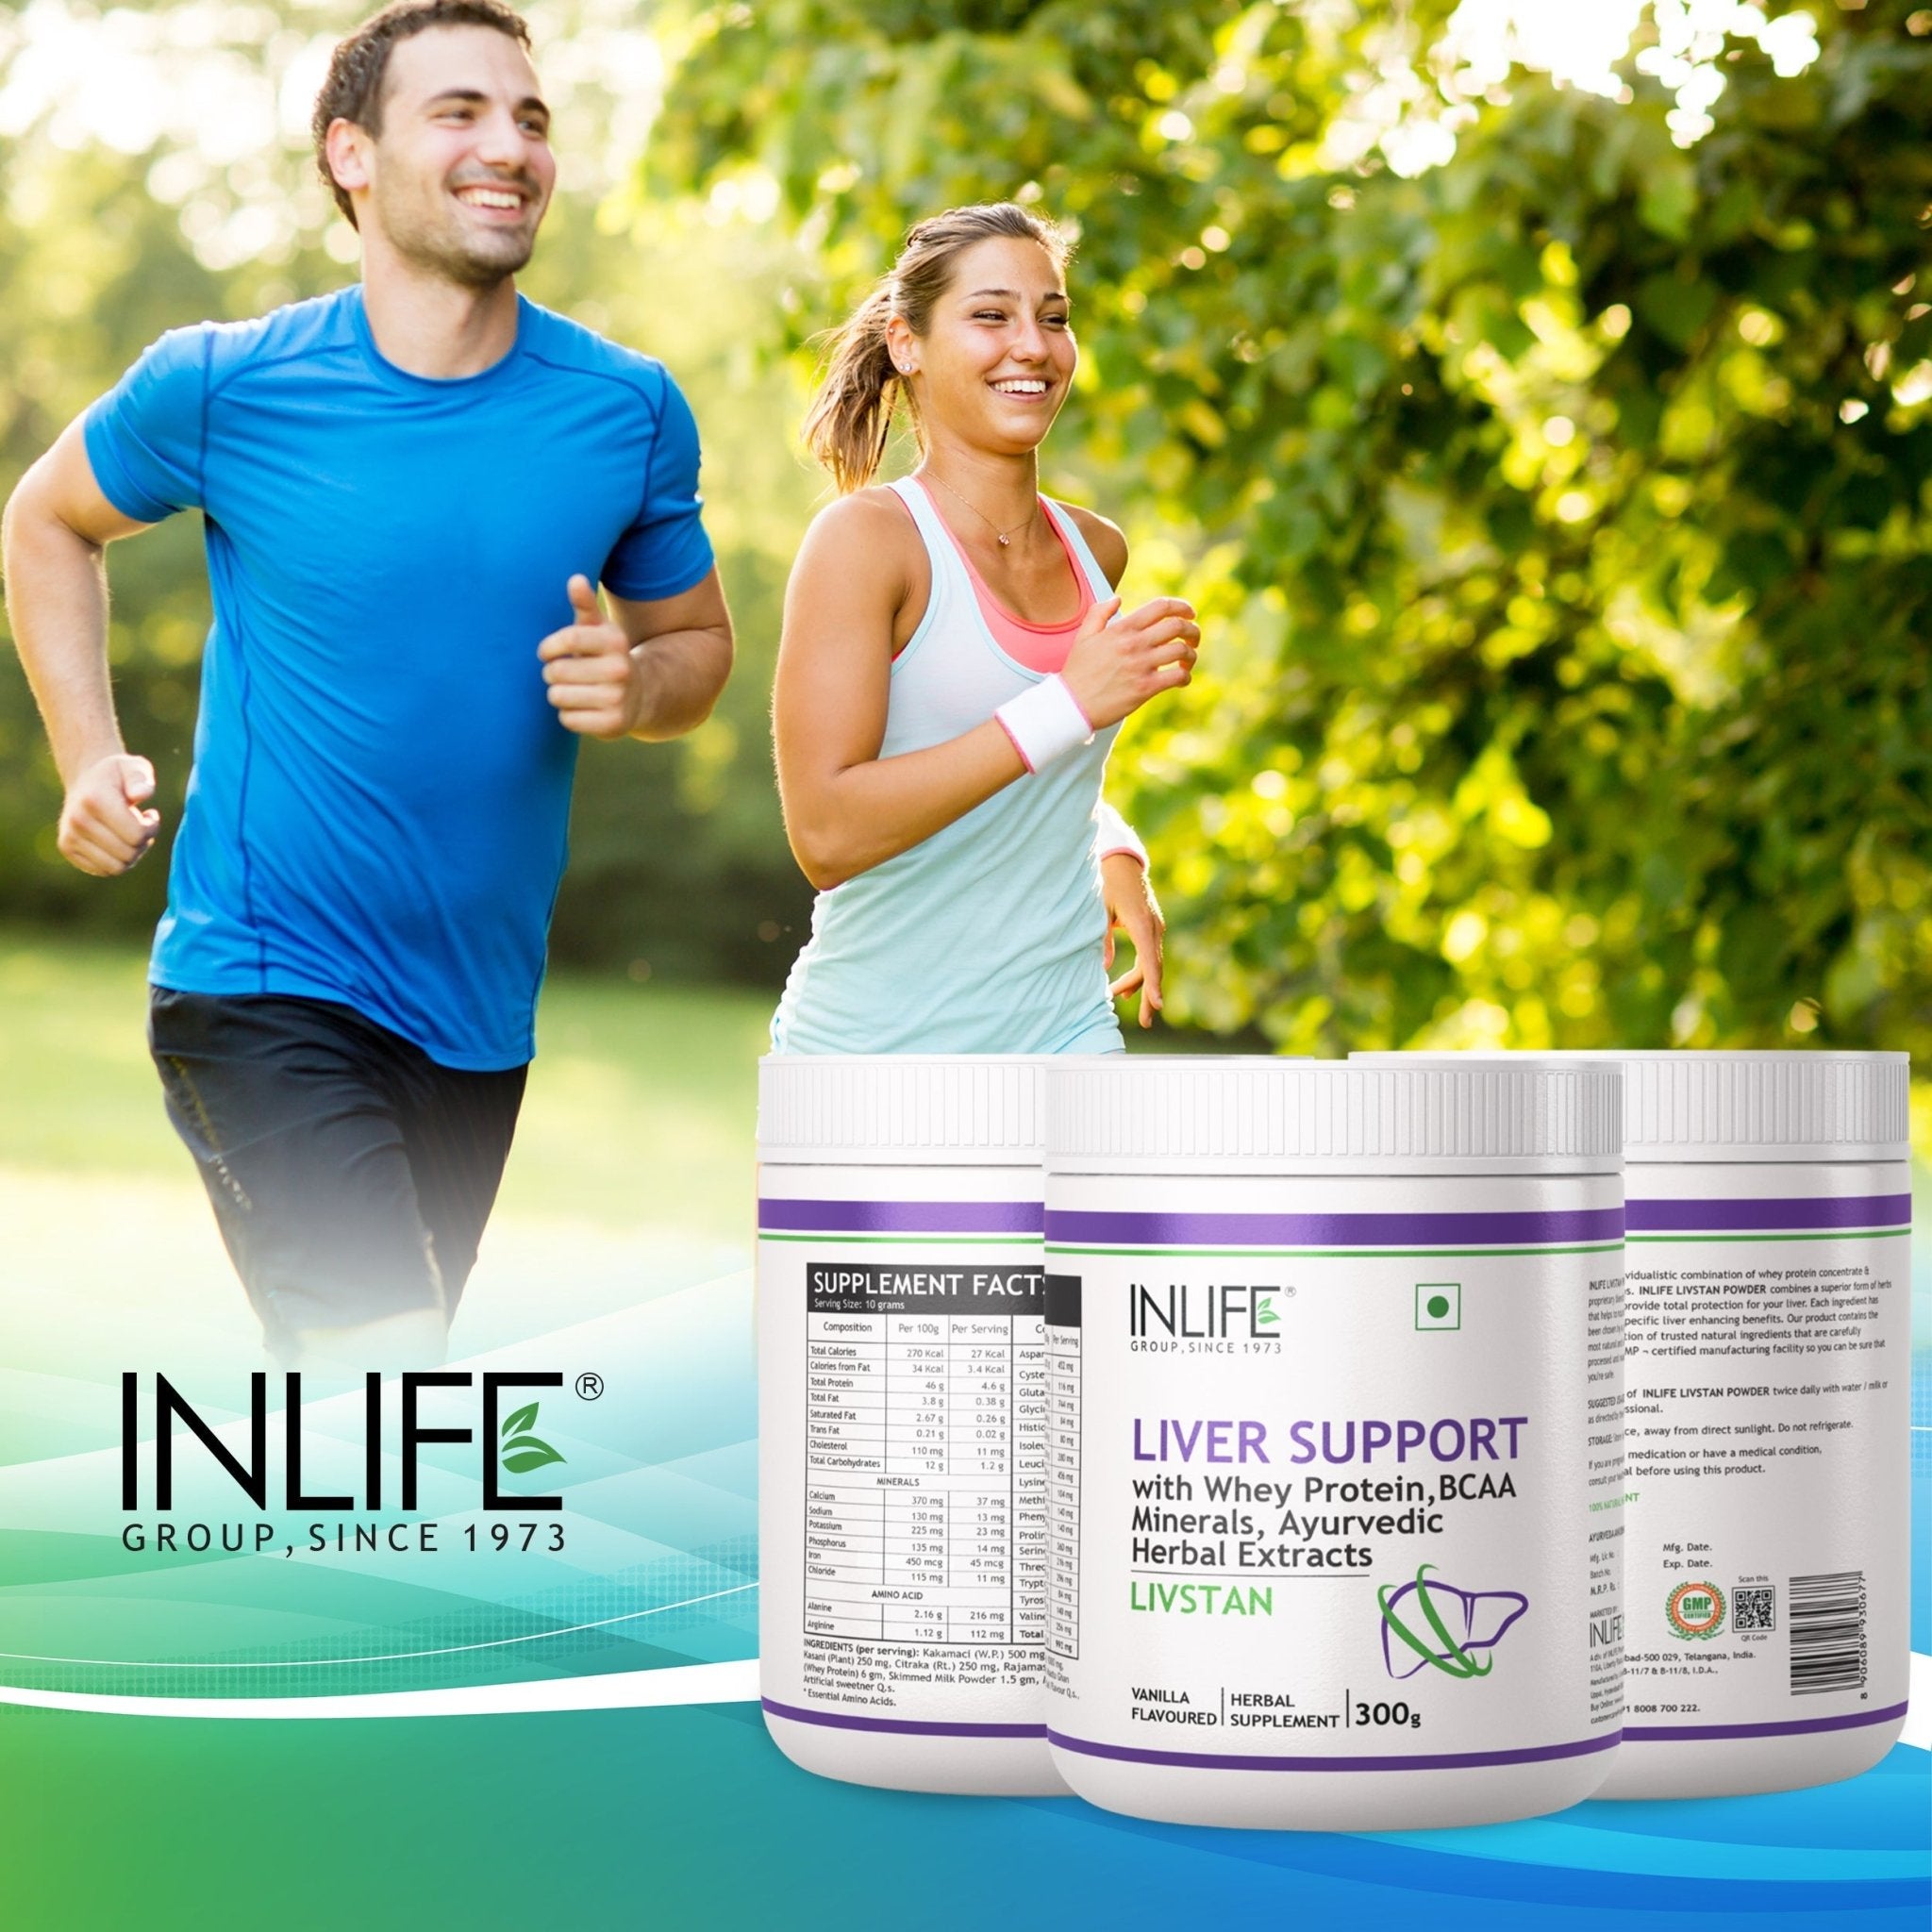 INLIFE Livstan Liver Support Powder, Whey Protein with Ayurvedic Herbs, 300g (Vanilla) - Inlife Pharma Private Limited